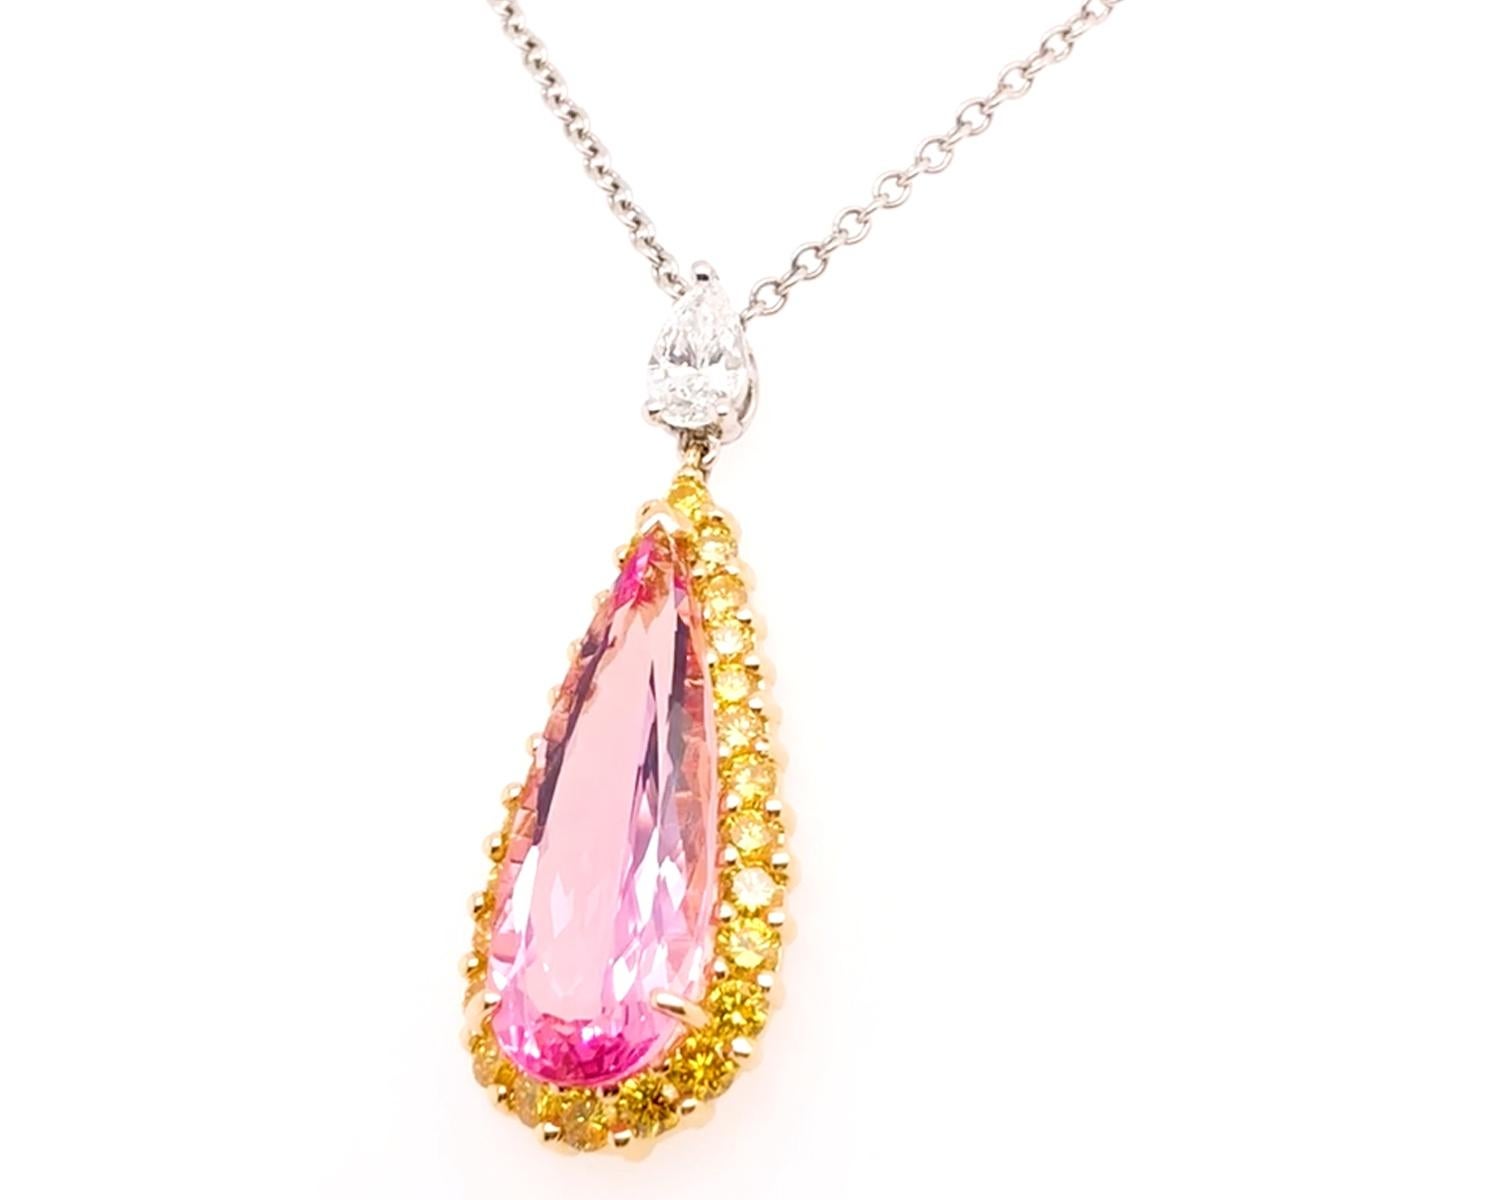 Oscar Heyman 18k gold and platinum pendant on a 16'' platinum chain contains 1 Pear Shape Morganite (6.59cts) surrounded by 26 Round Fancy Vivid Yellow Diamonds (1.25cts). Hangs from the chain with a 0.48ct Pear Shape Diamond. It is stamped with the